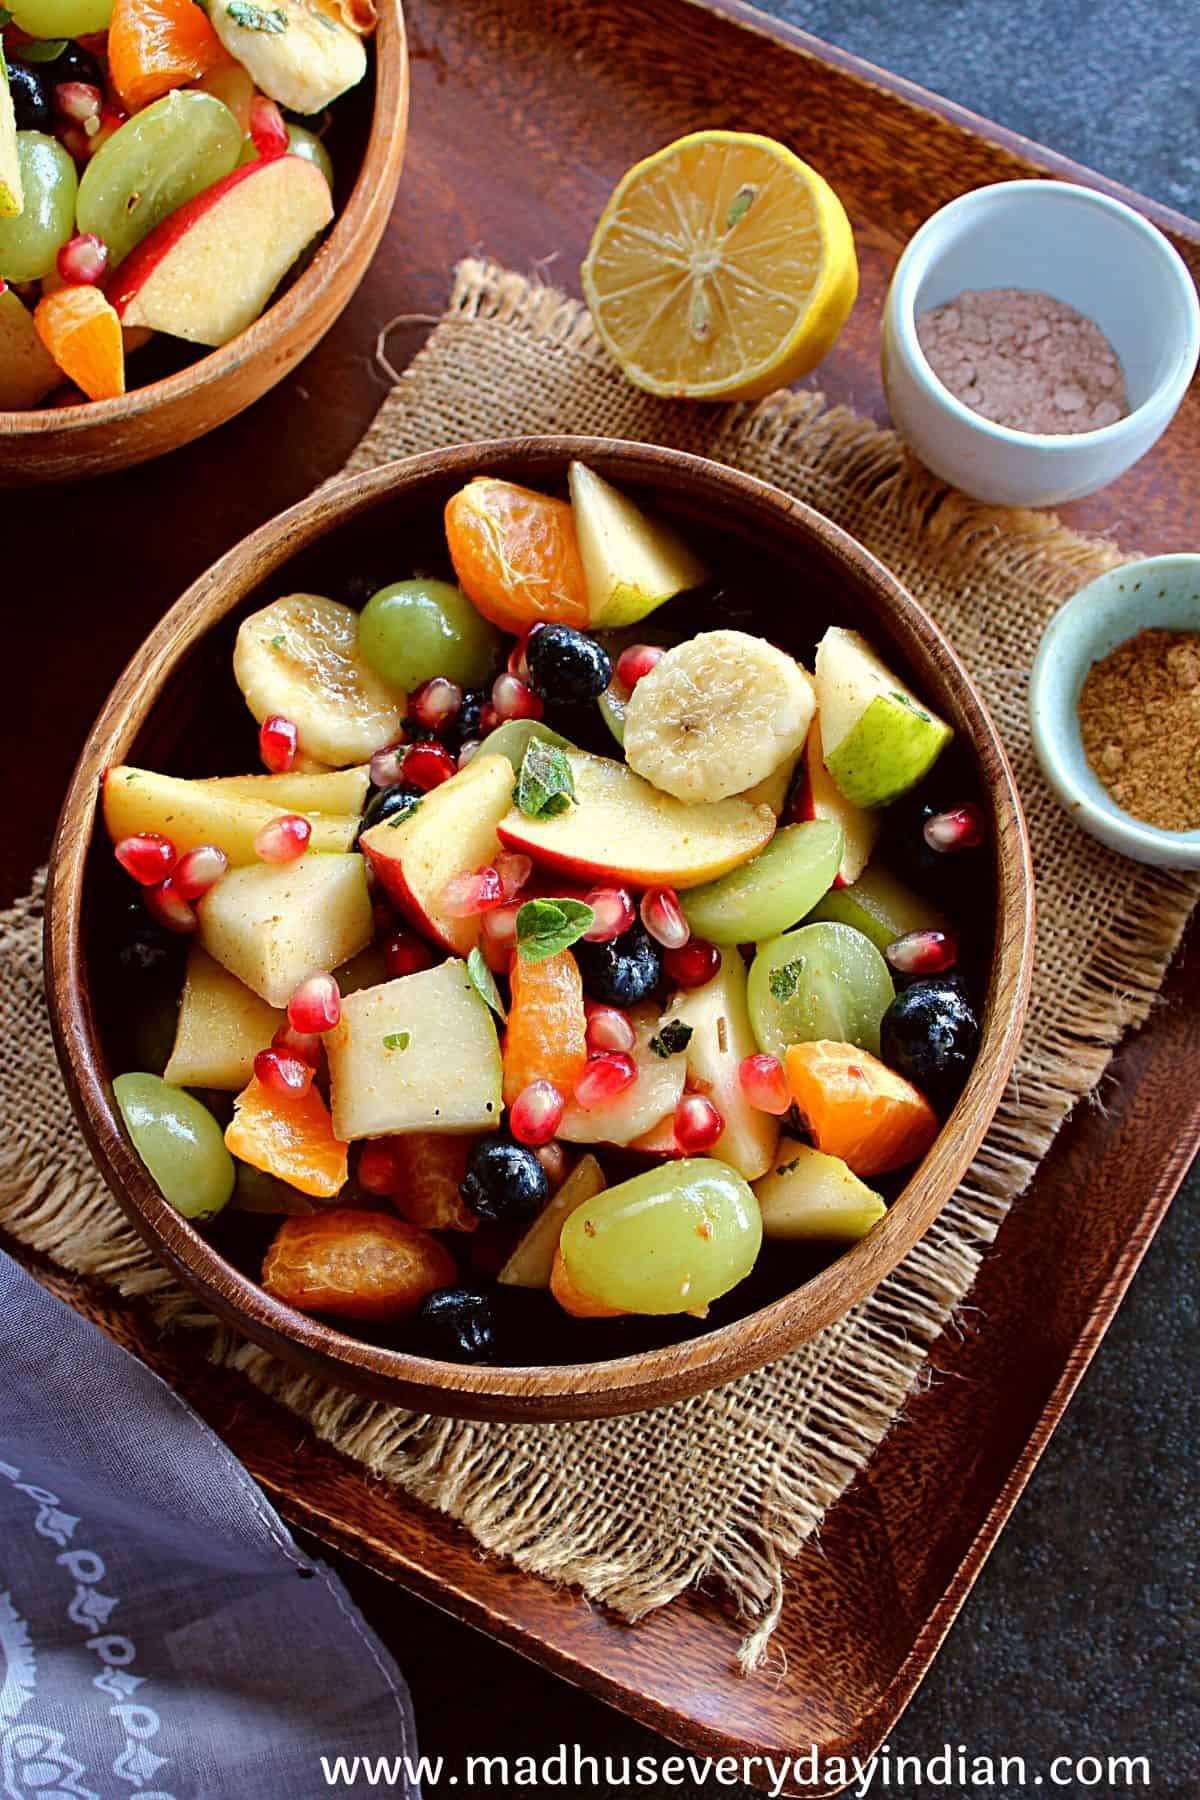 Fruit Chaat | Indian Fruit Salad - Madhu's Everyday Indian